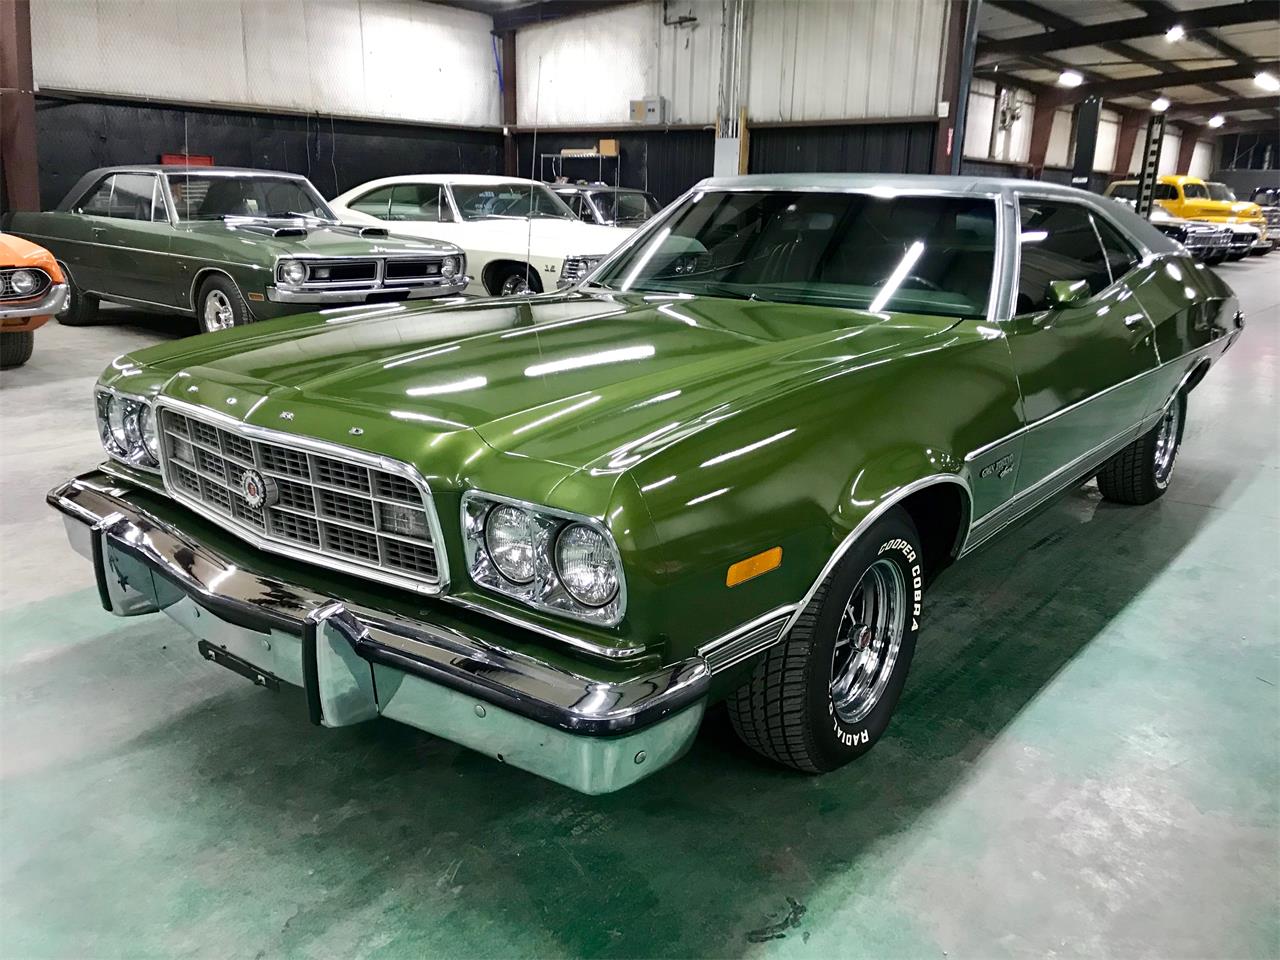 Ford Gran Torino Classic Cars for Sale - Classics on Autotrader